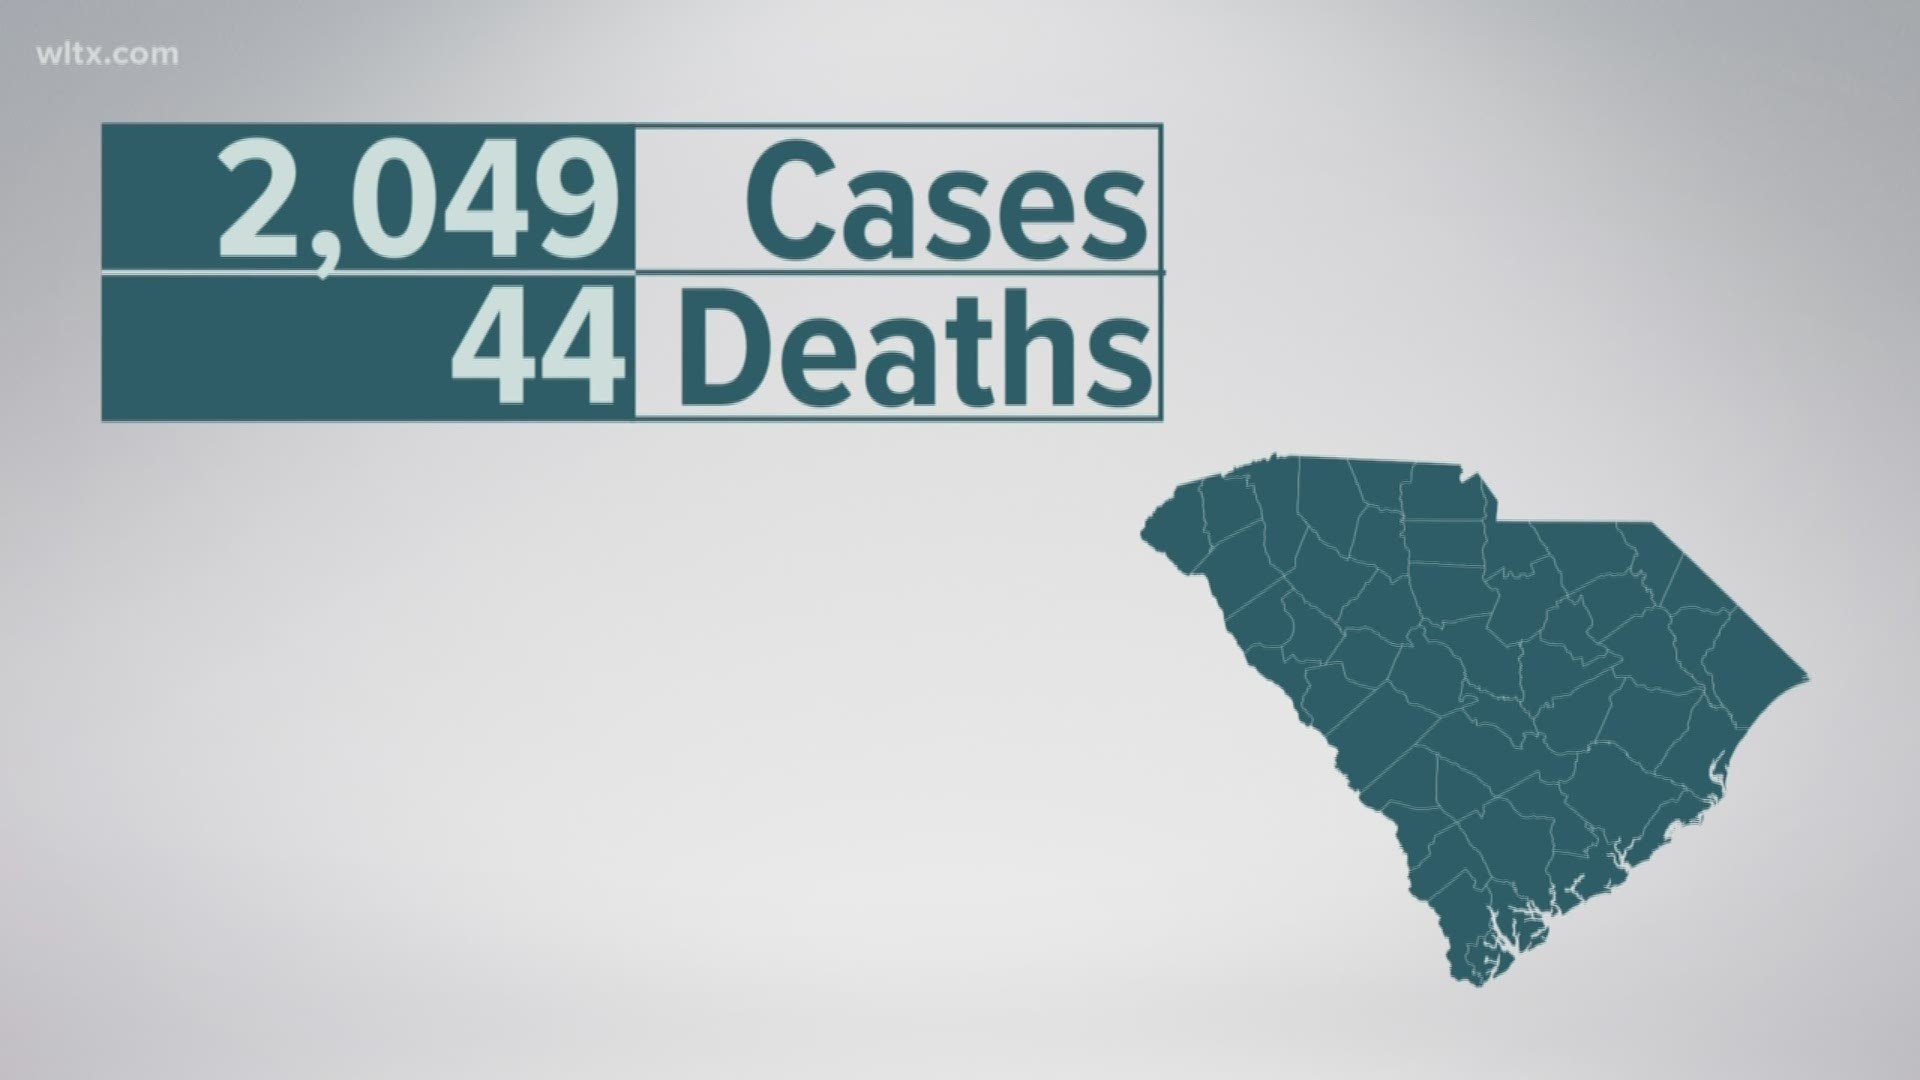 DHEC announced 132 new cases, bringing the total number to 2,049 statewide.